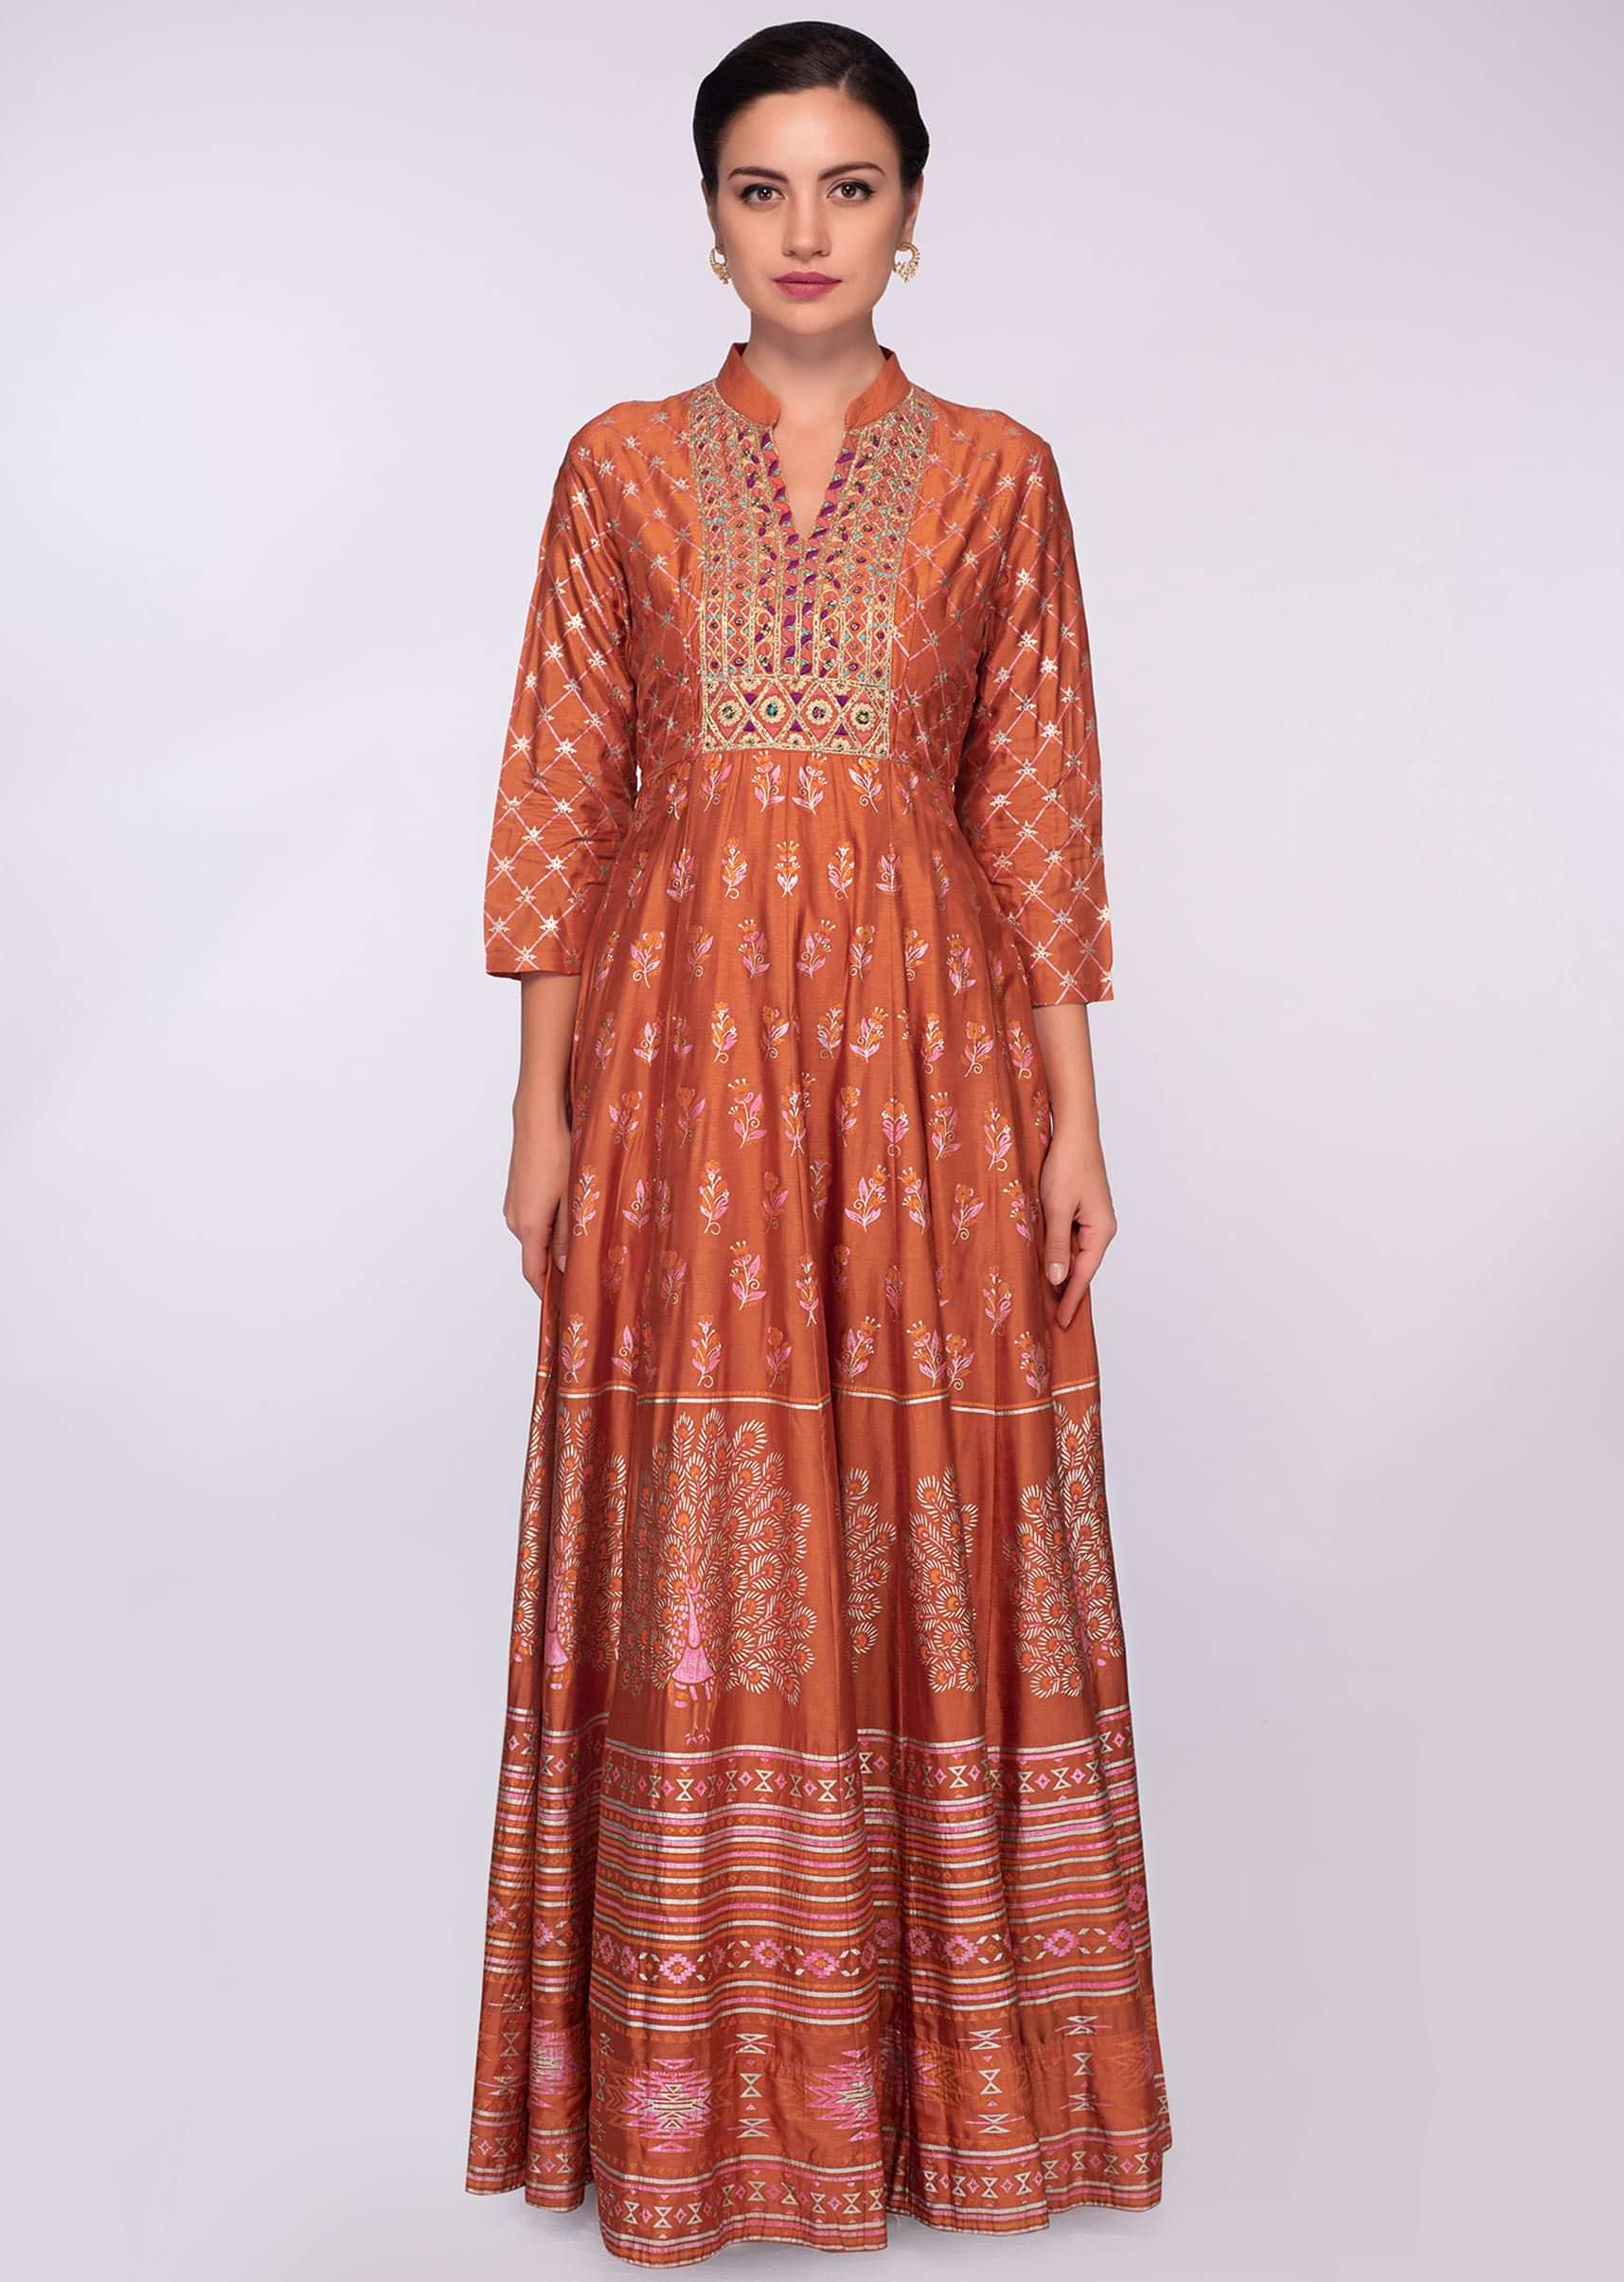 Orange cotton dress in foil print and embroidery work